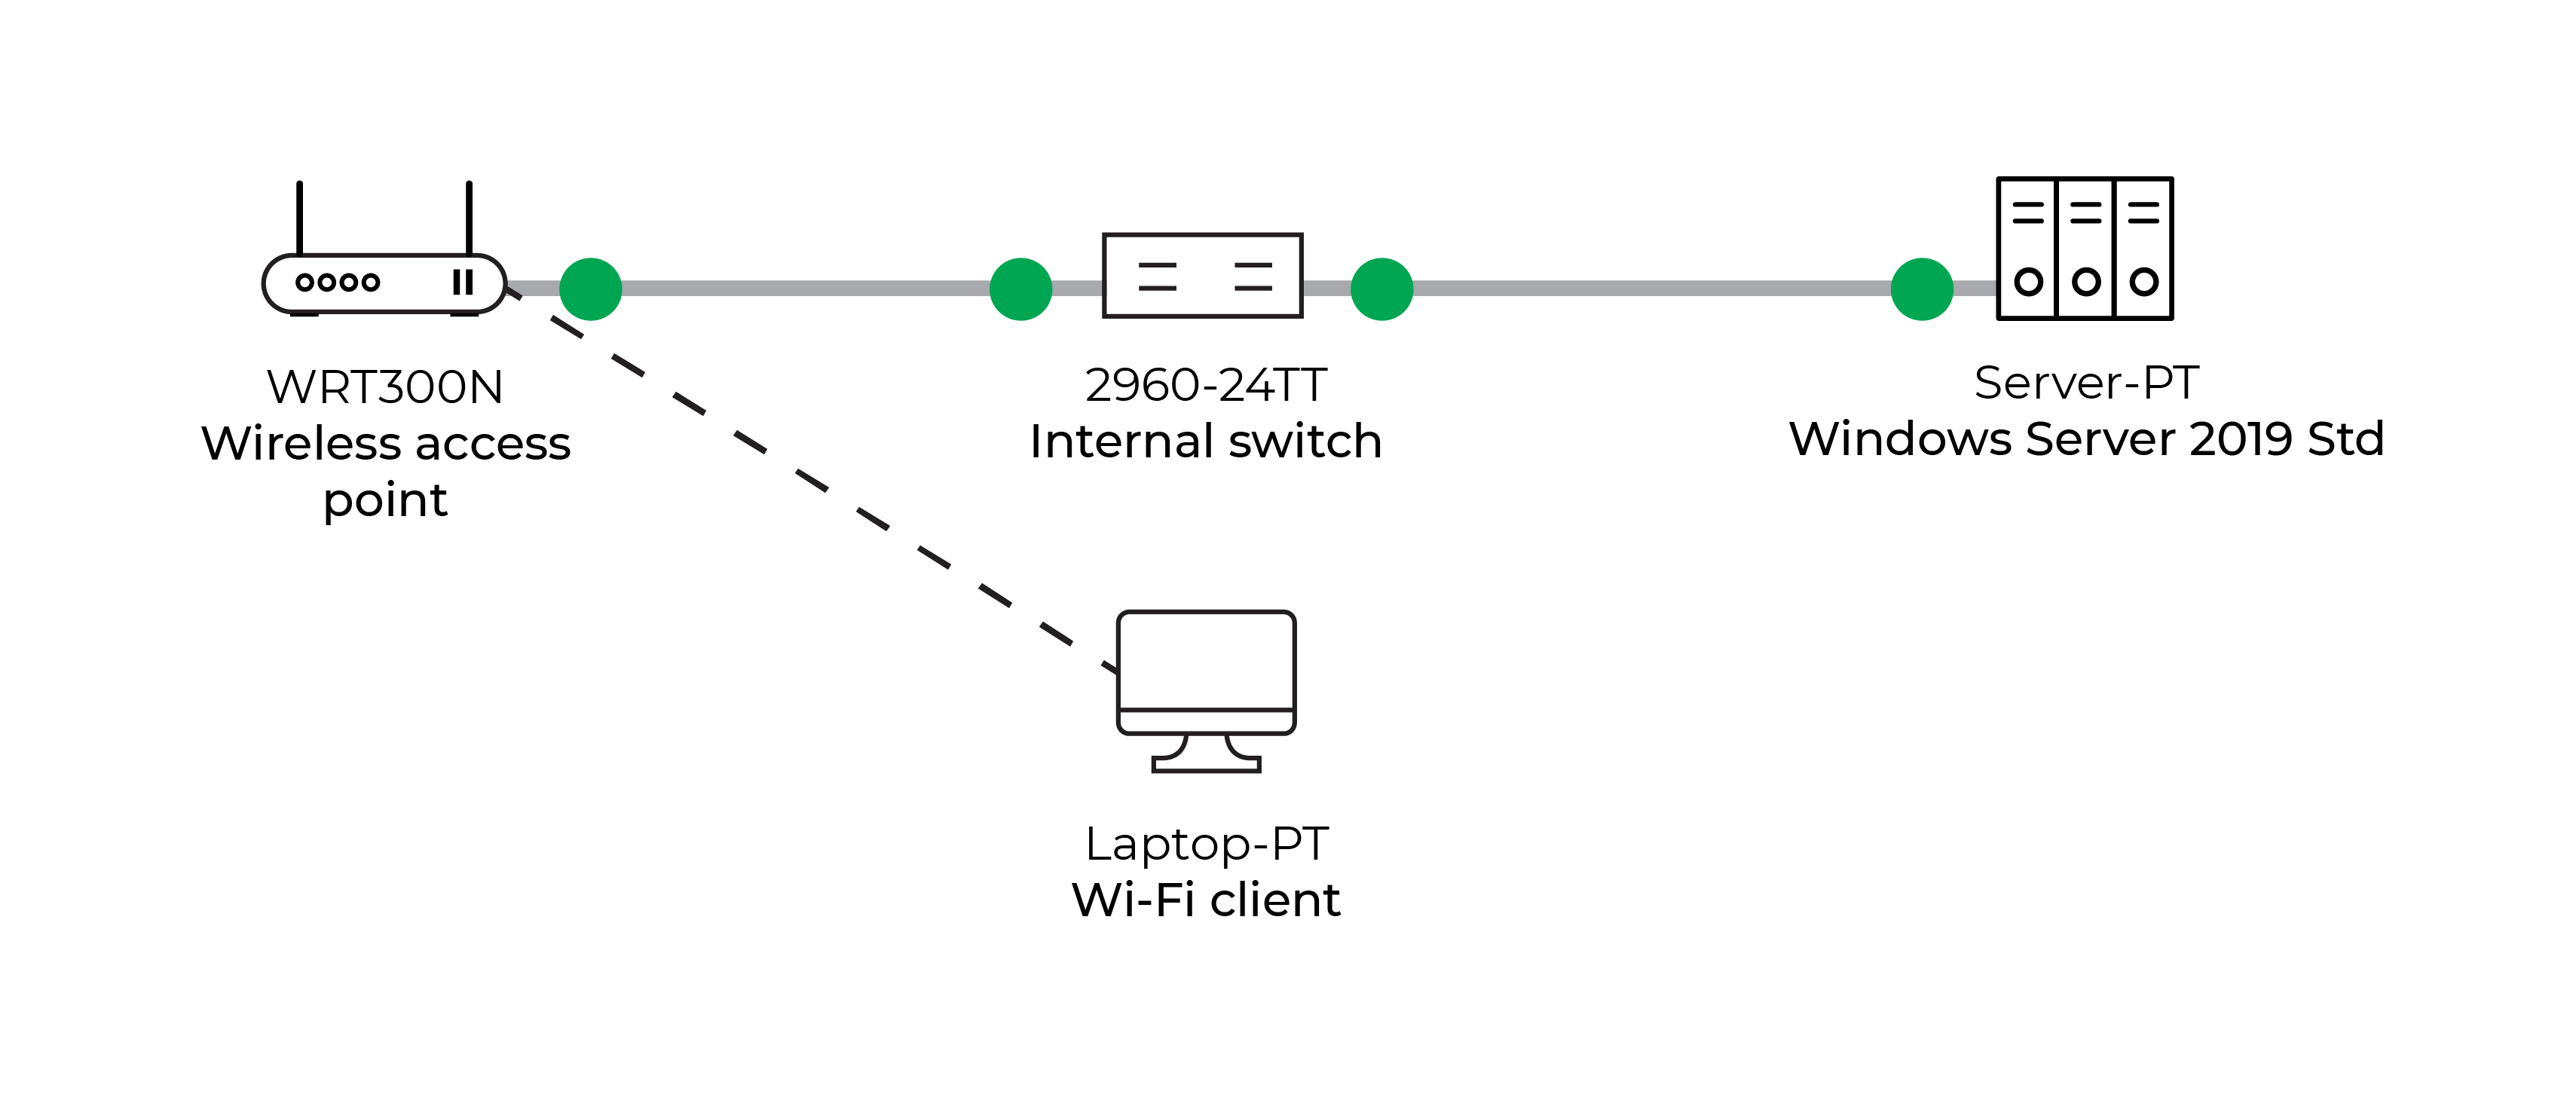 Wi-Fi client authorized to connect to the network using RADIUS protocol